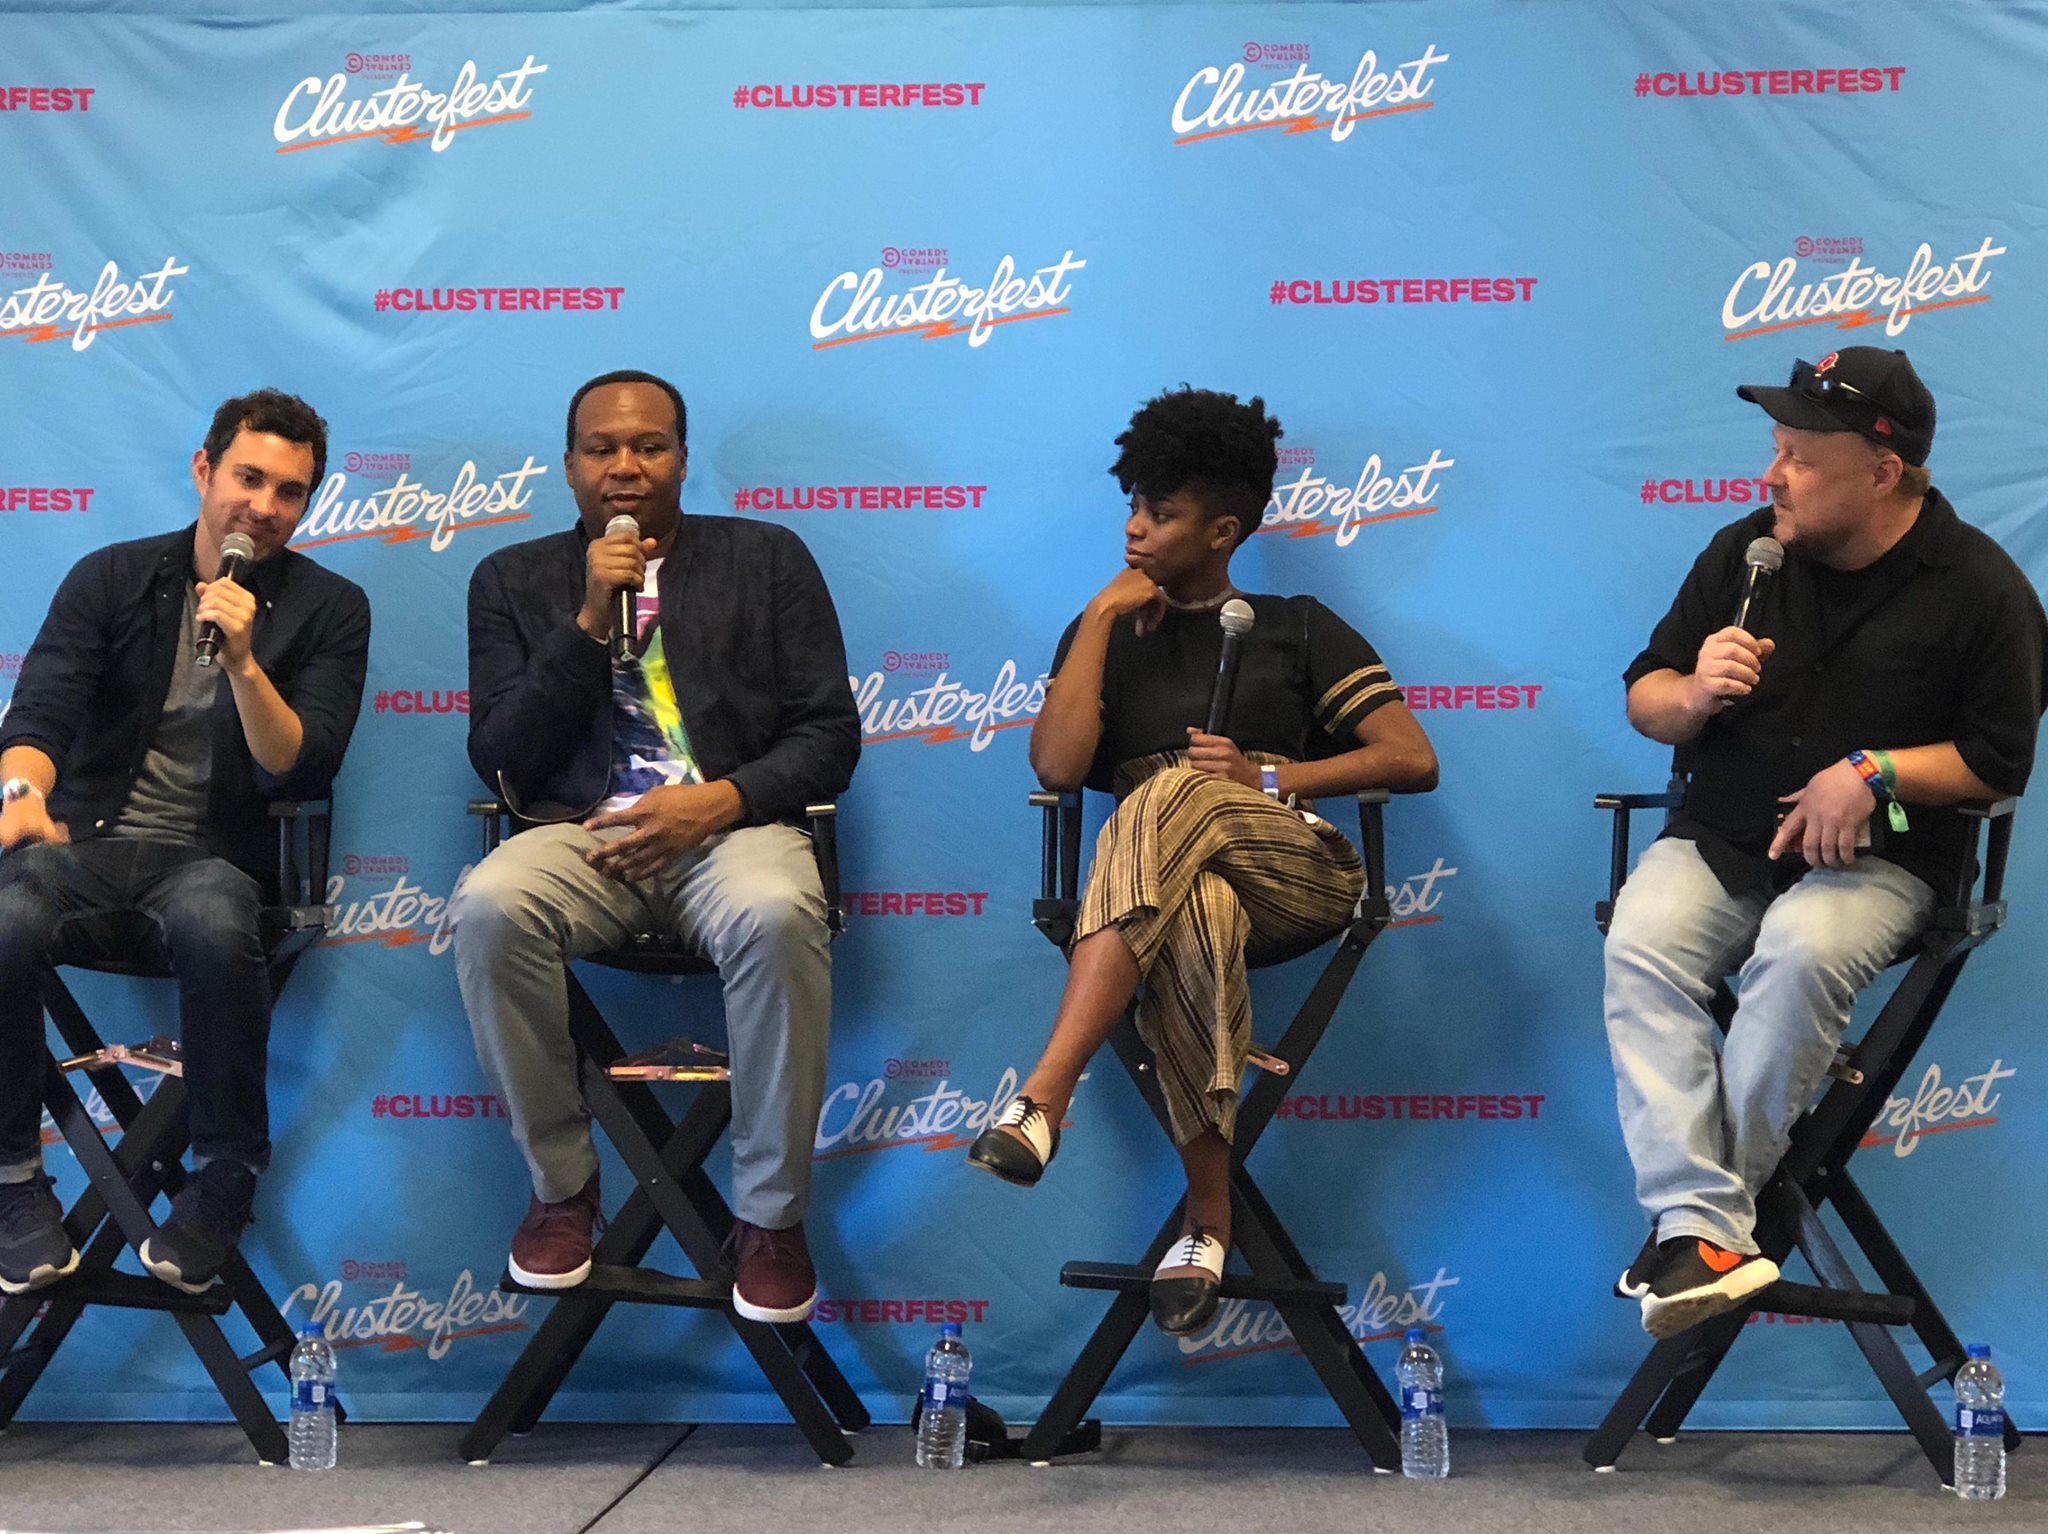 Episode #212: Clusterfest 2018 with Mark Normand, Roy Wood Jr., and Sasheer Zamata